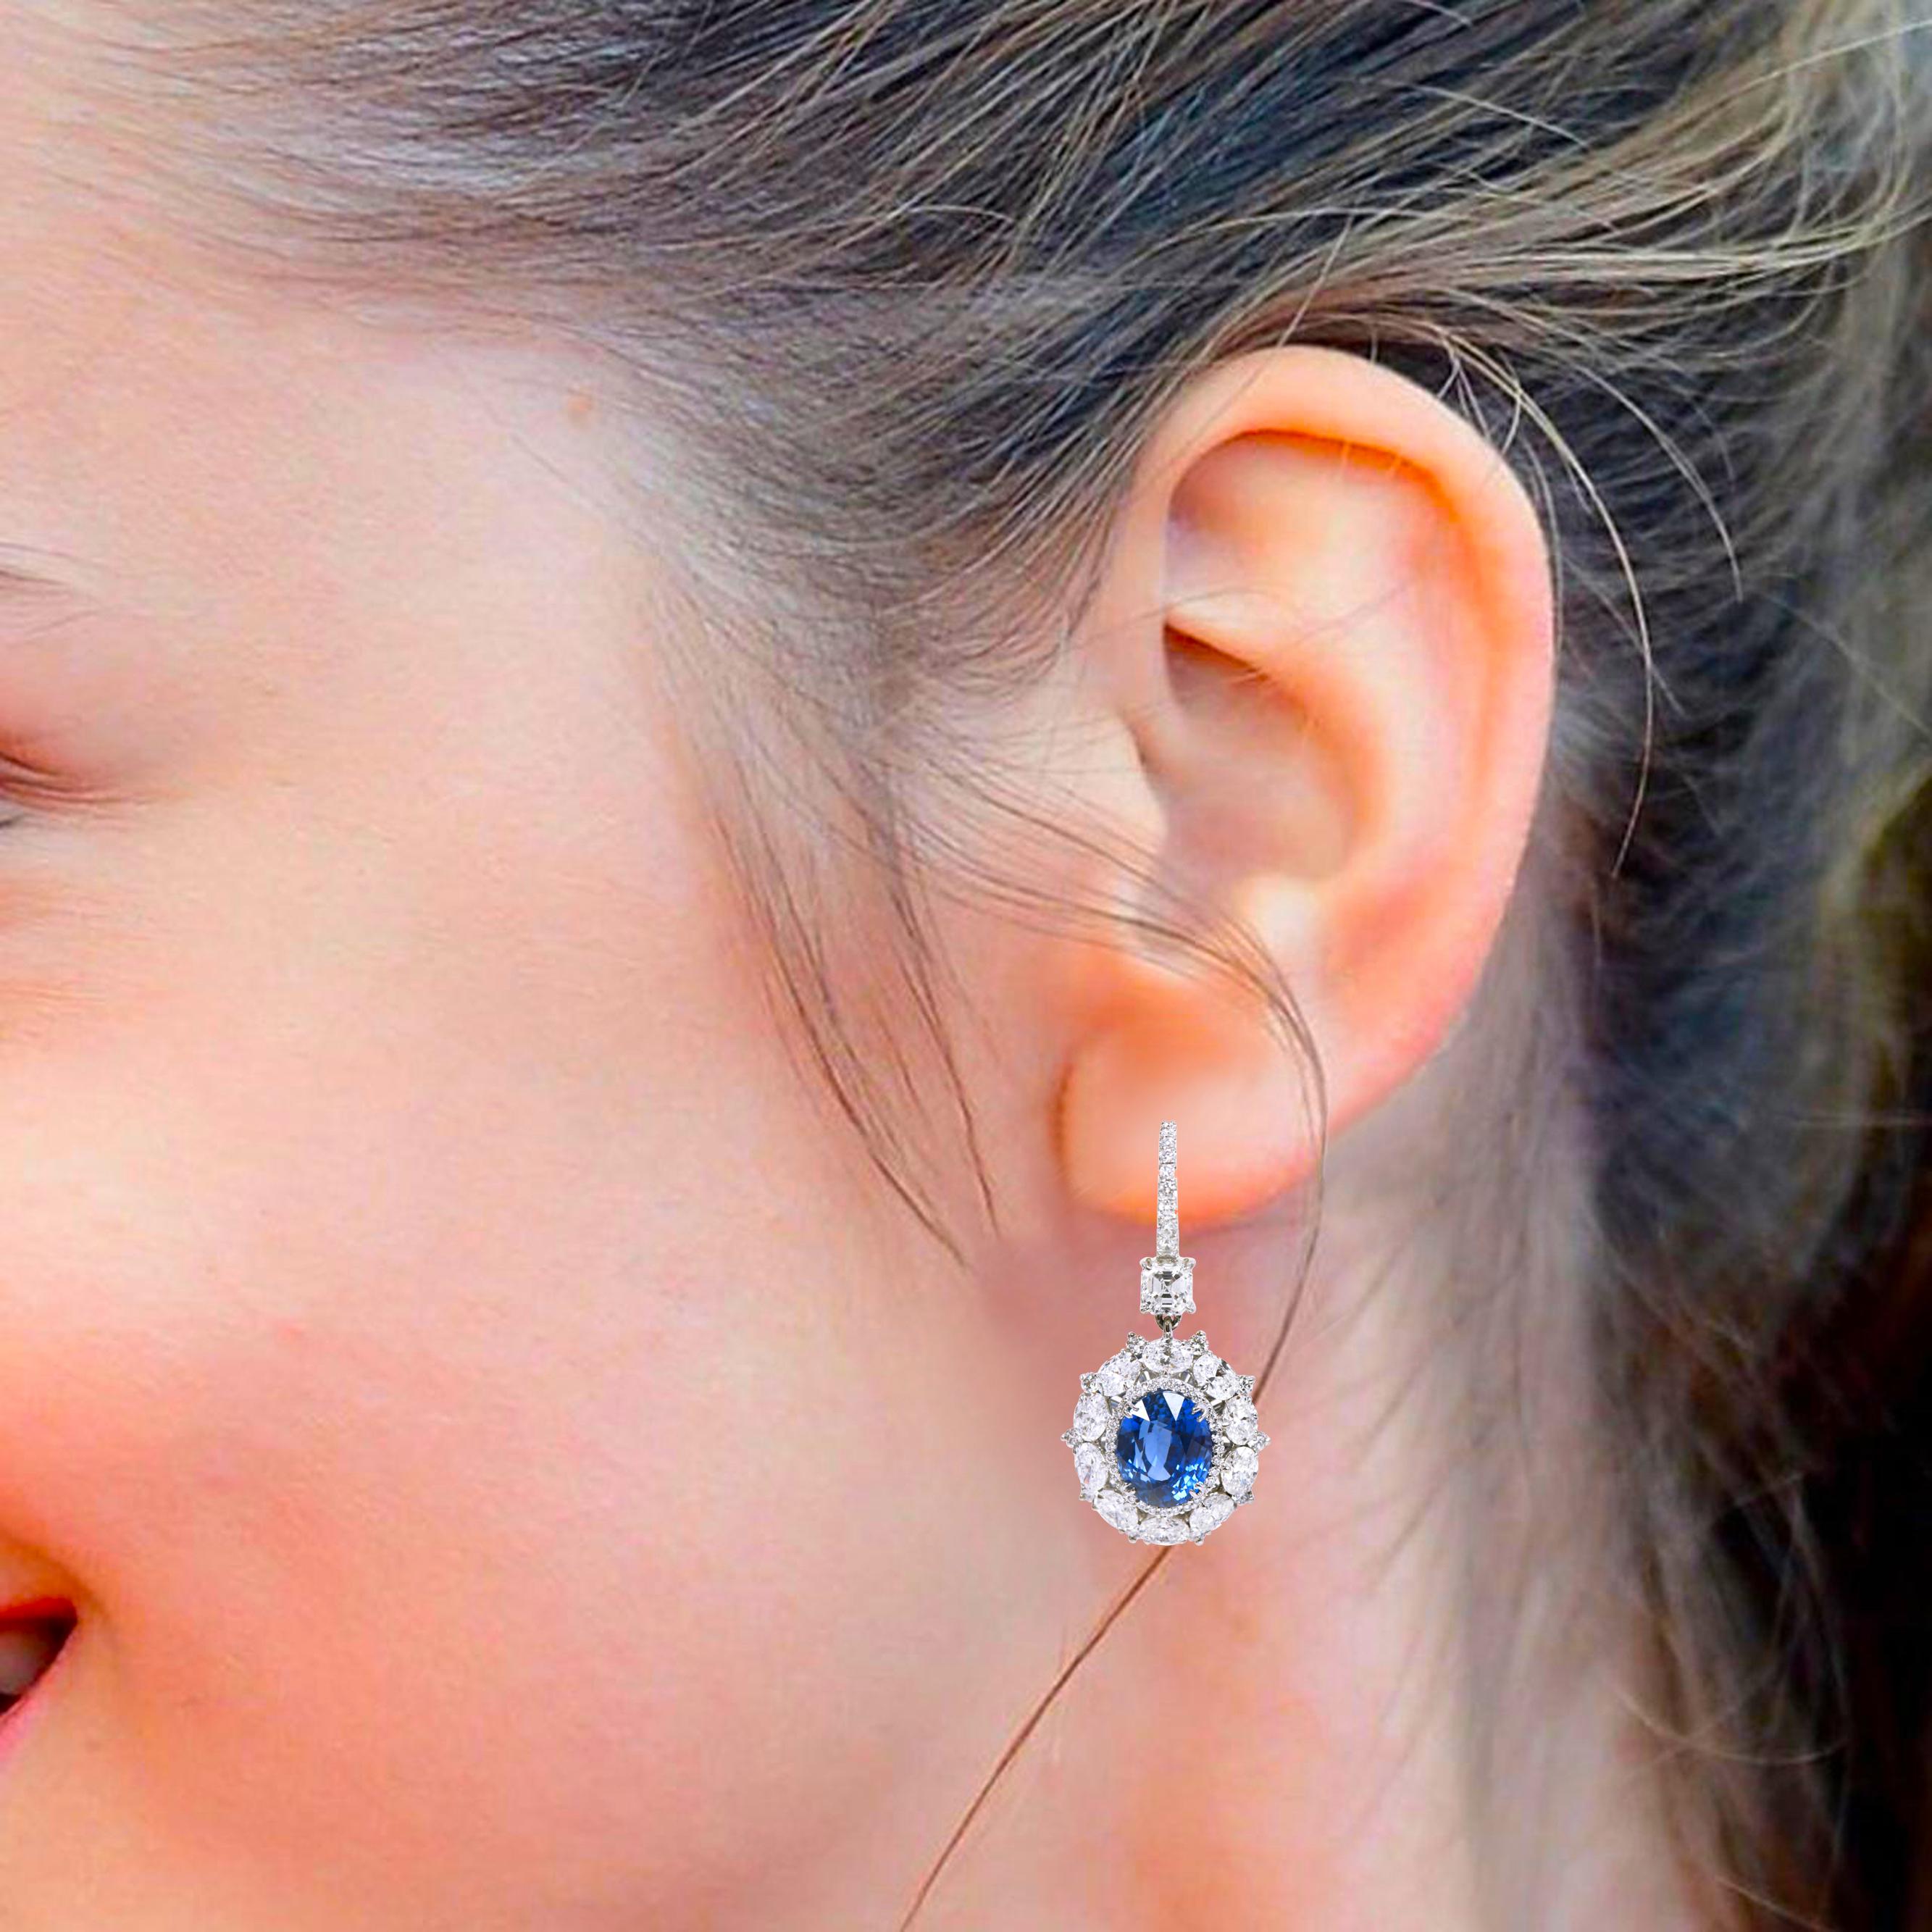 Platinum 15.23 Carats Solitaire Diamond and Blue Sapphire Cocktail Earrings

Mesmerizing, modest, and ethereal, this eclectic pair of earrings have a wear-forever power. Hanging from a  classic hoop of pavè diamonds, encrusted with a diamond that